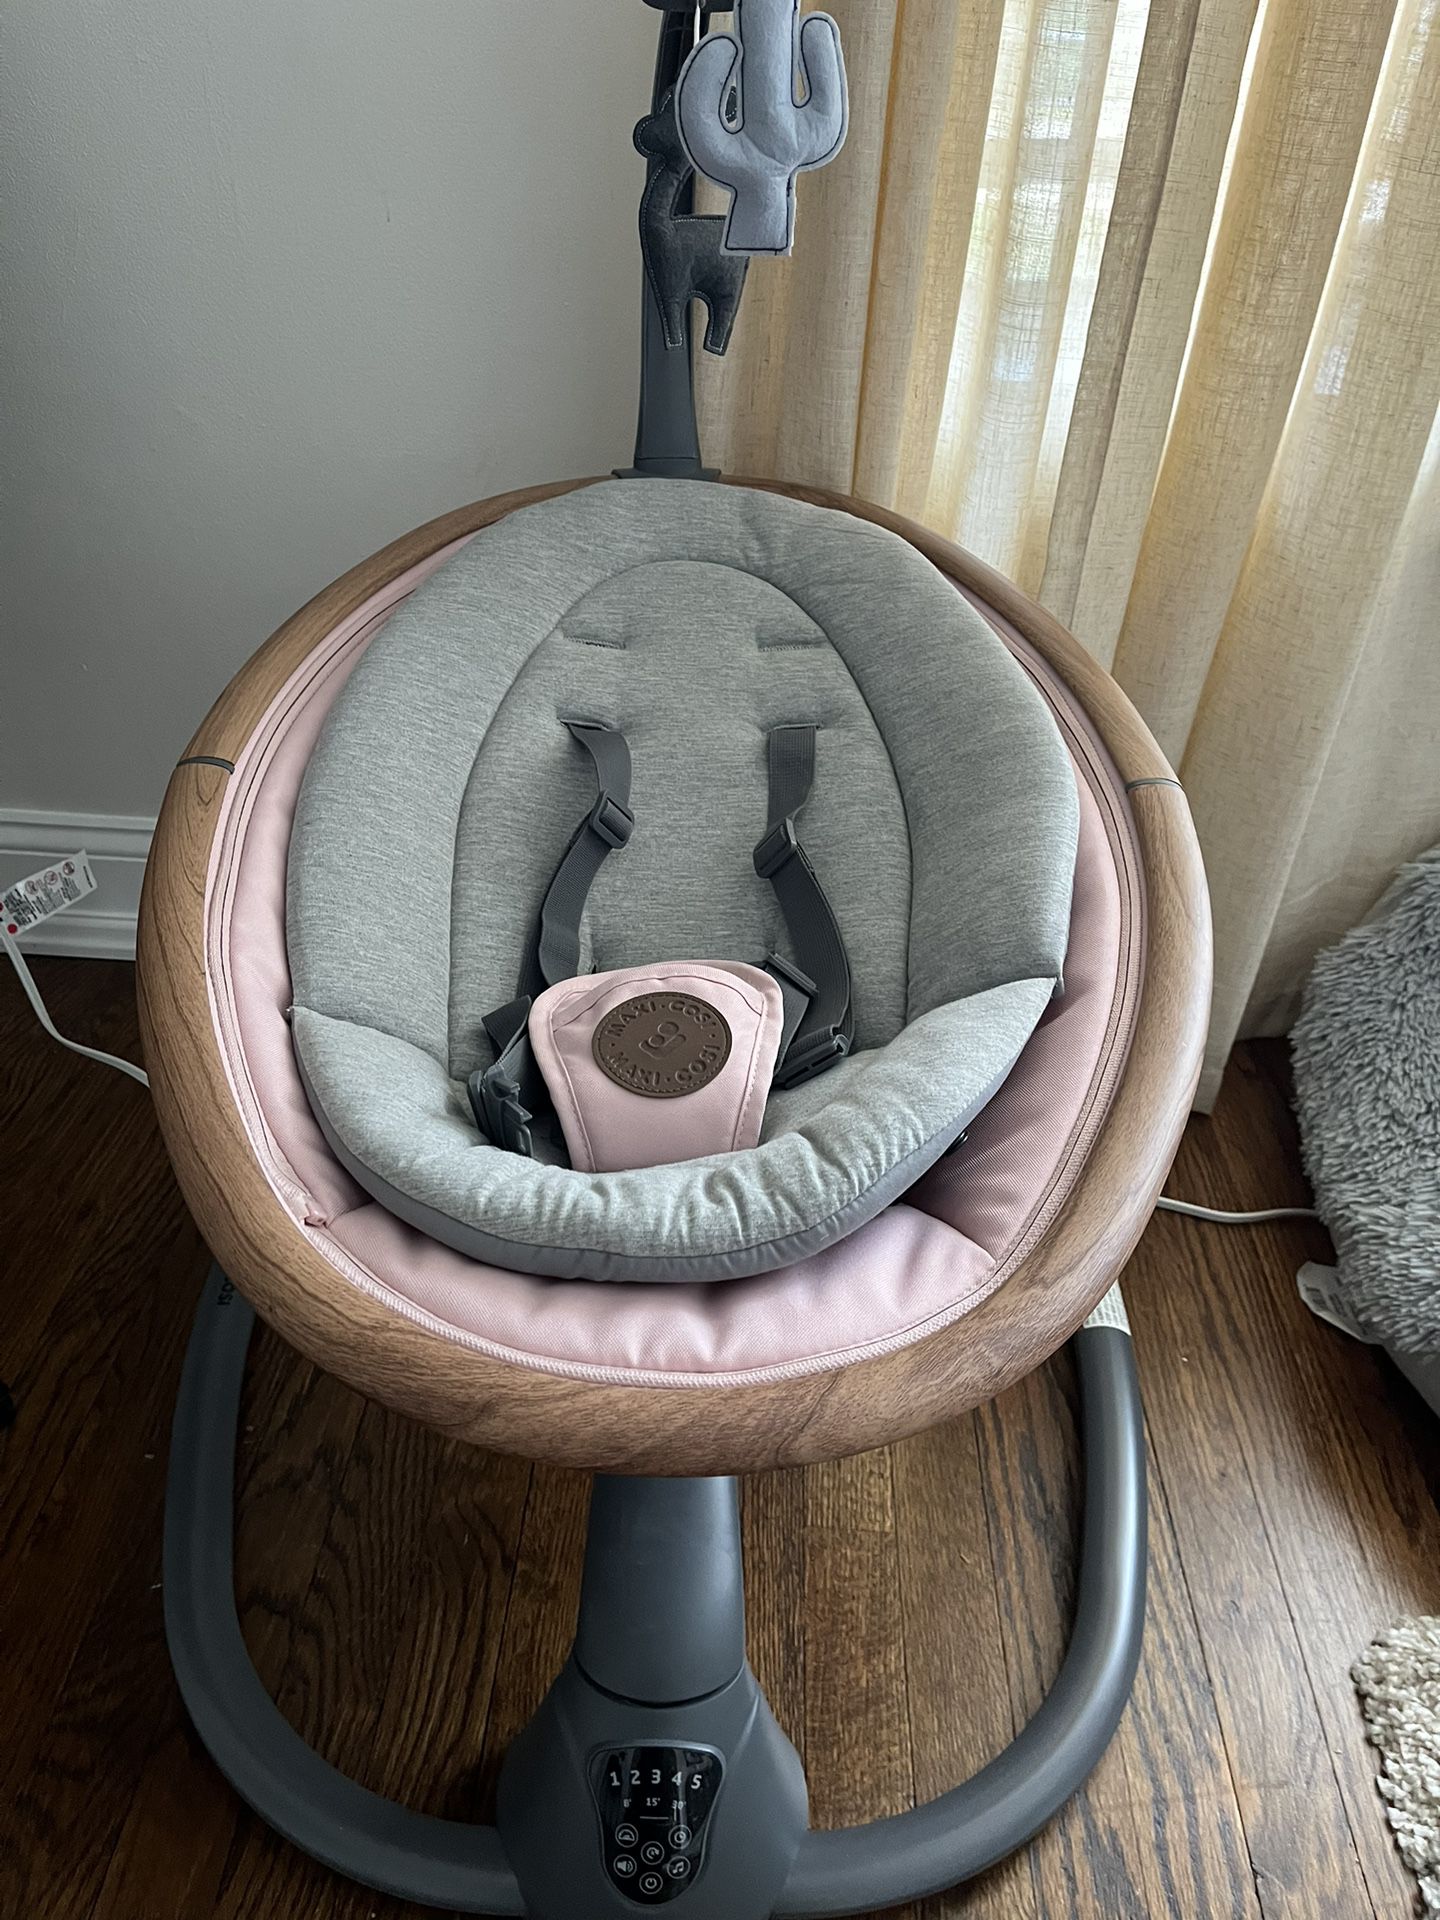 Maxi cost Baby Swing - Like New 